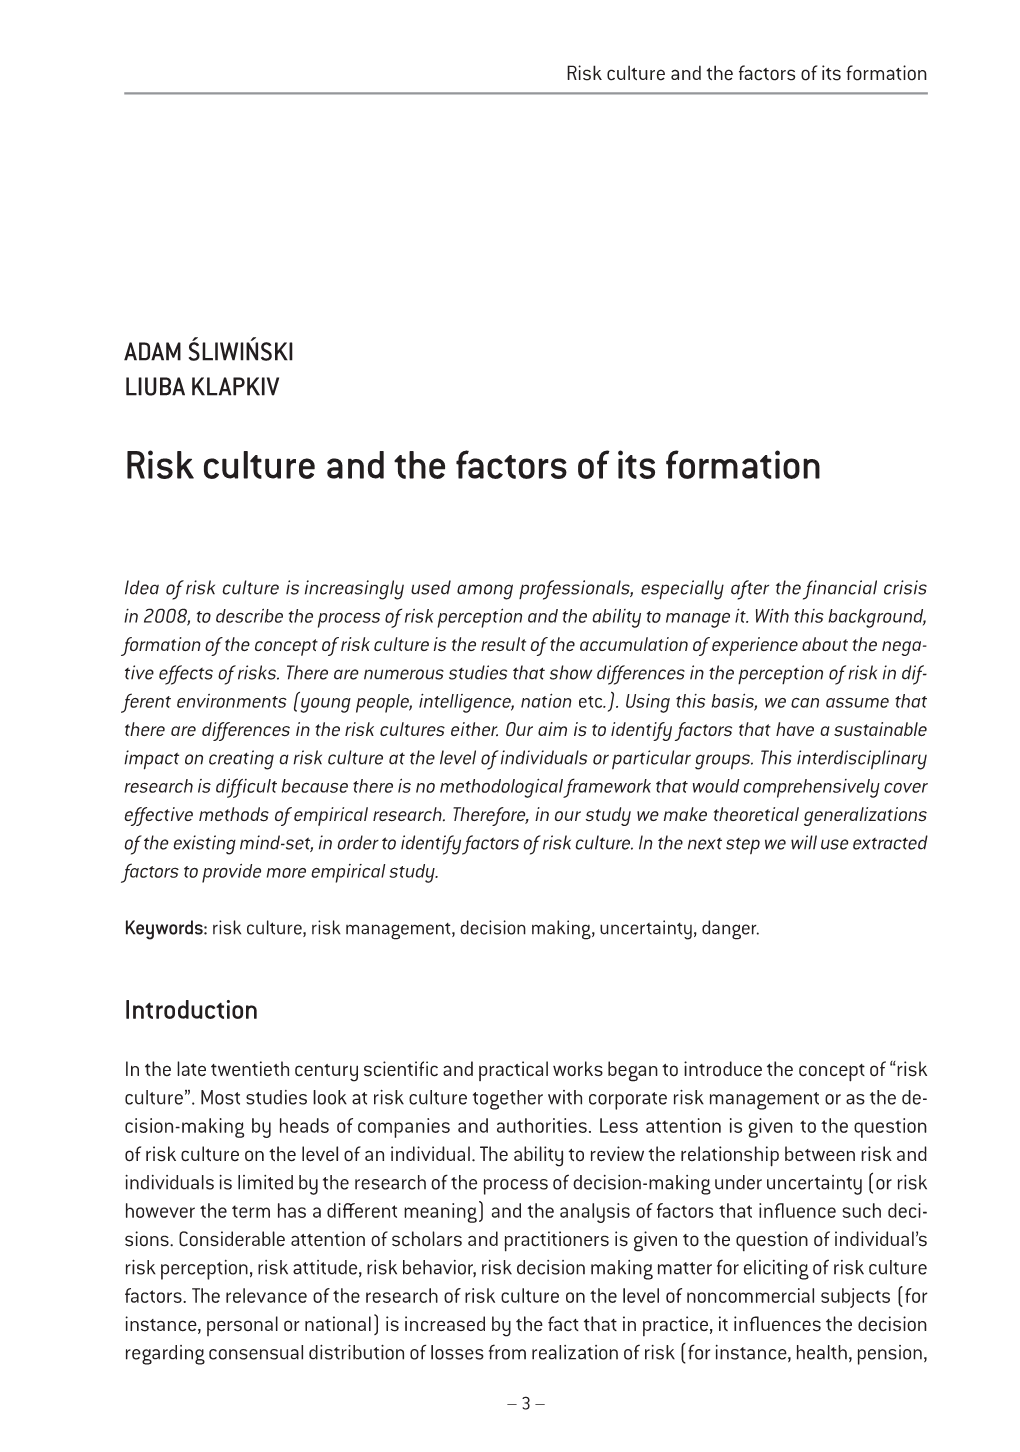 Risk Culture and the Factors of Its Formation